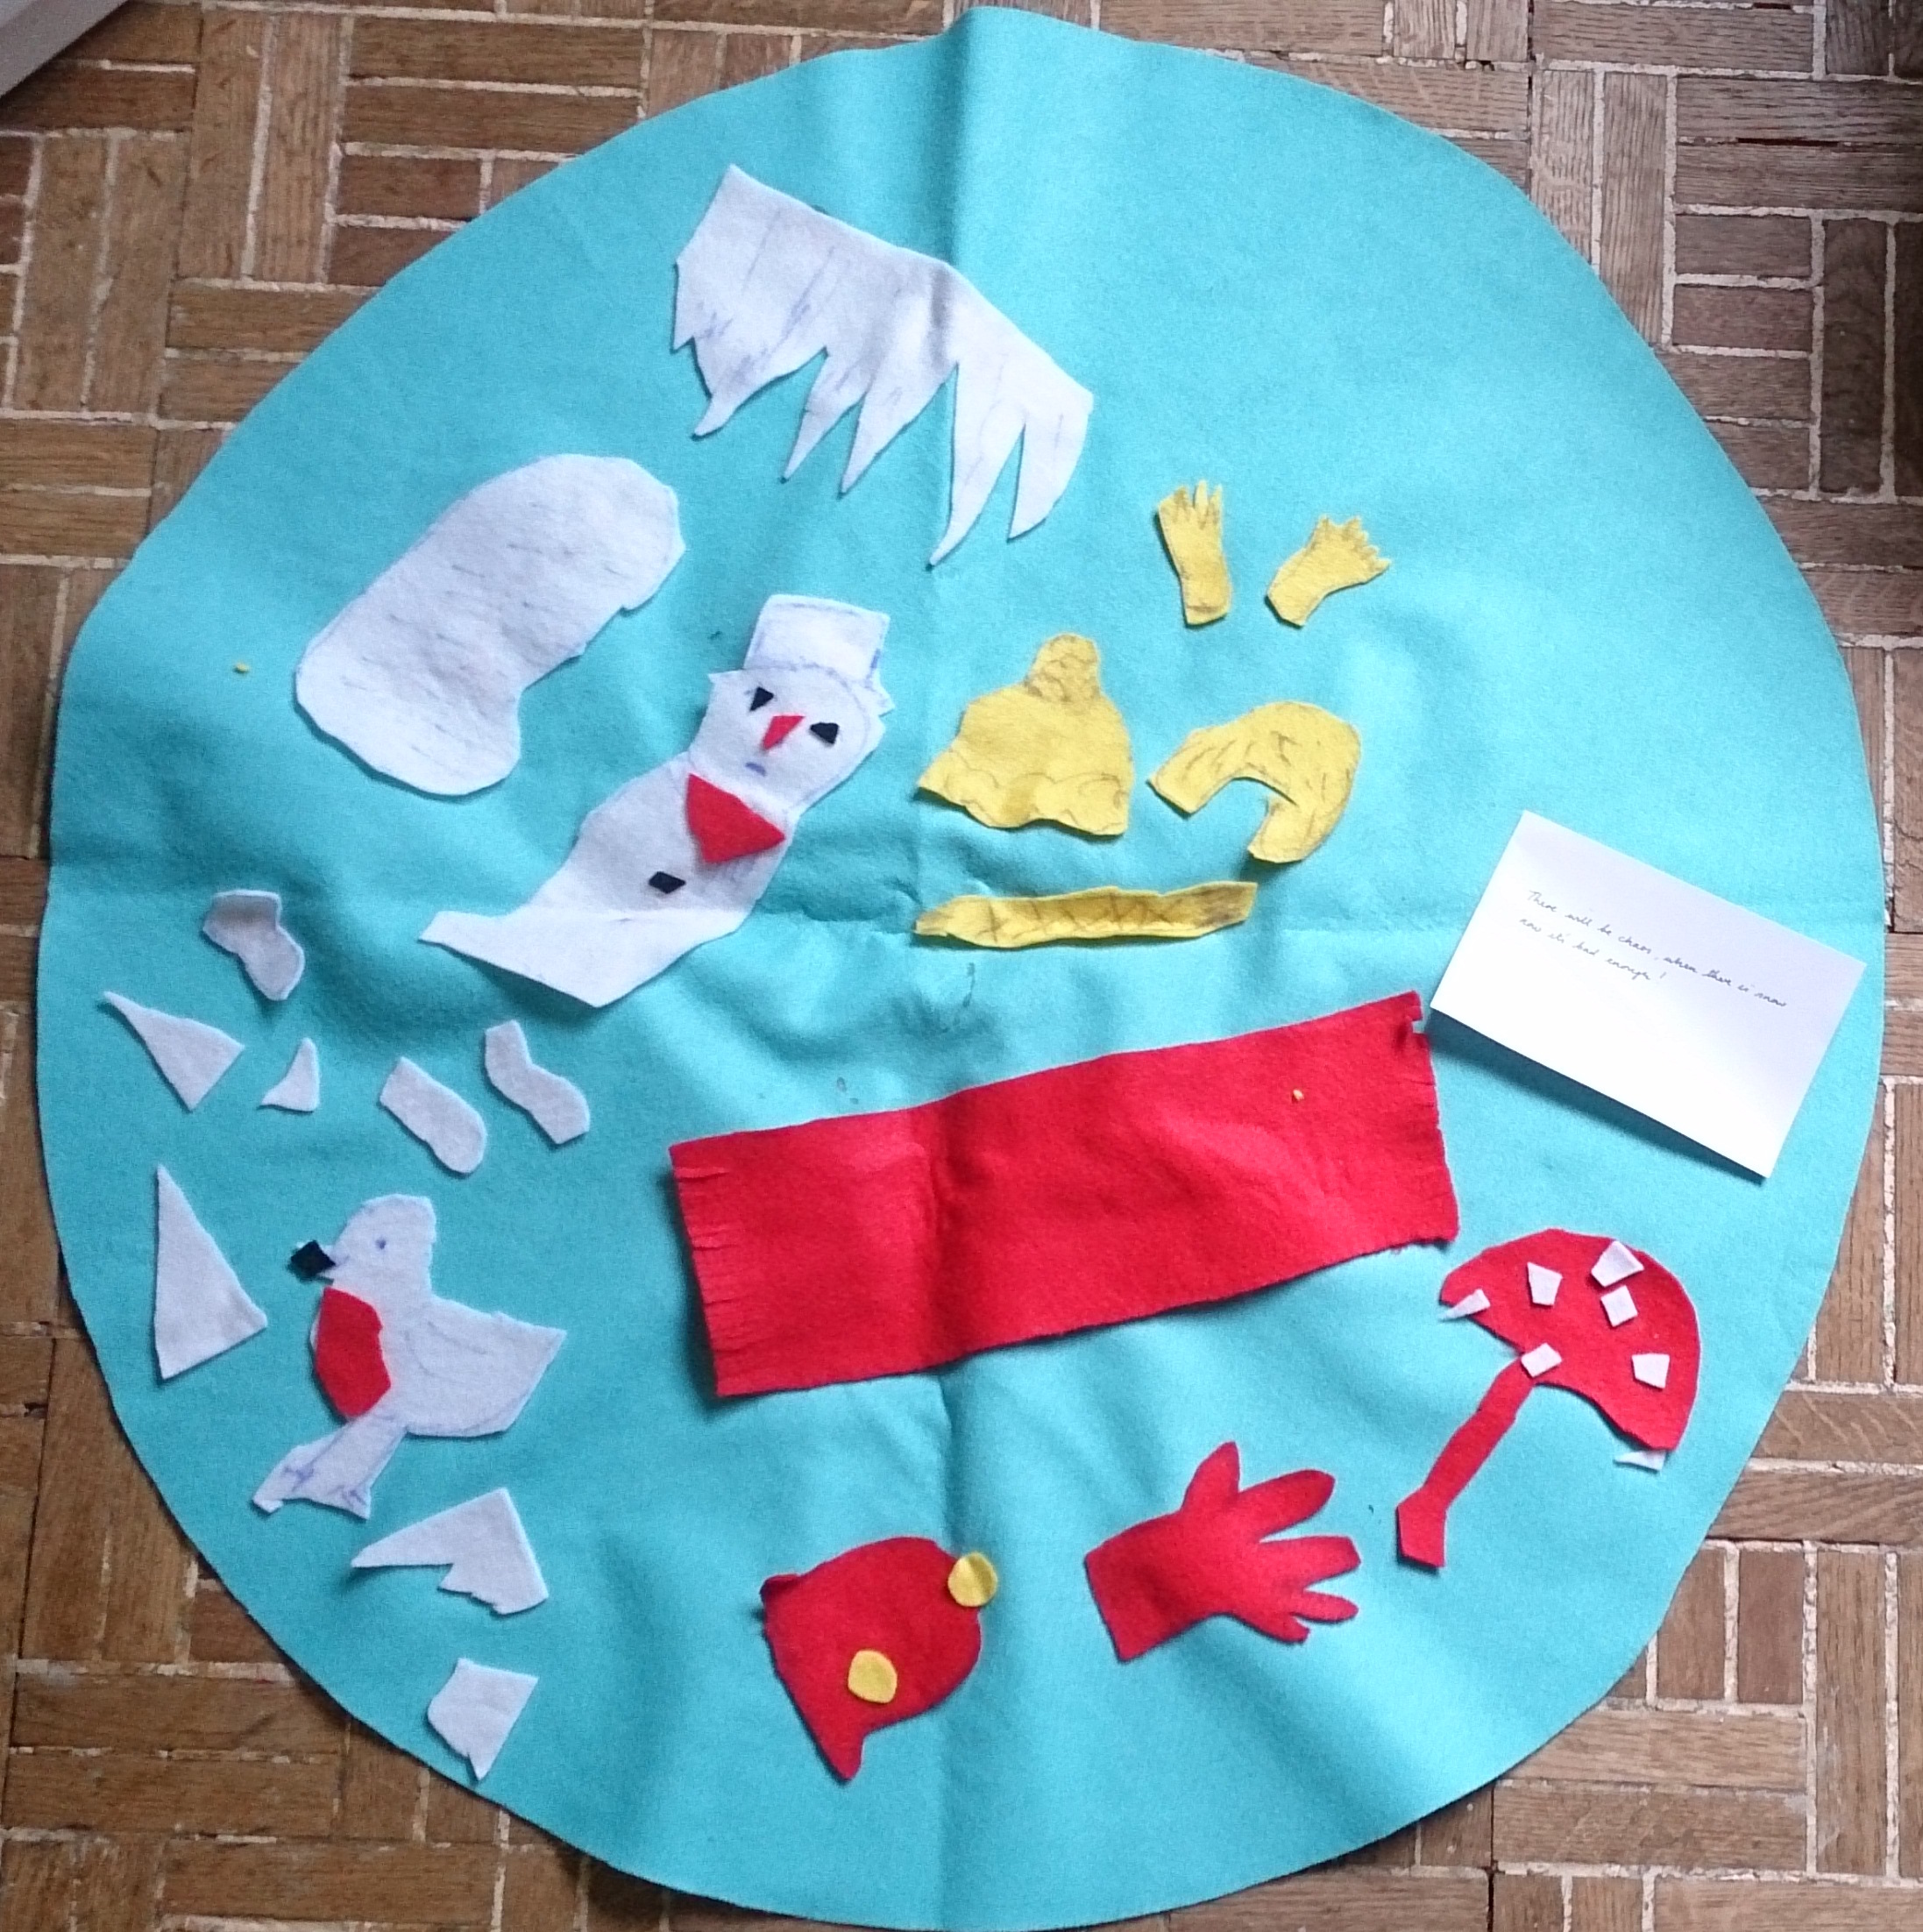 Felt data map representing cold weather scenarios with a prediction for the future attached (snow man, gloves, umbrella, hats, ice and Robin redbreast made from felt)